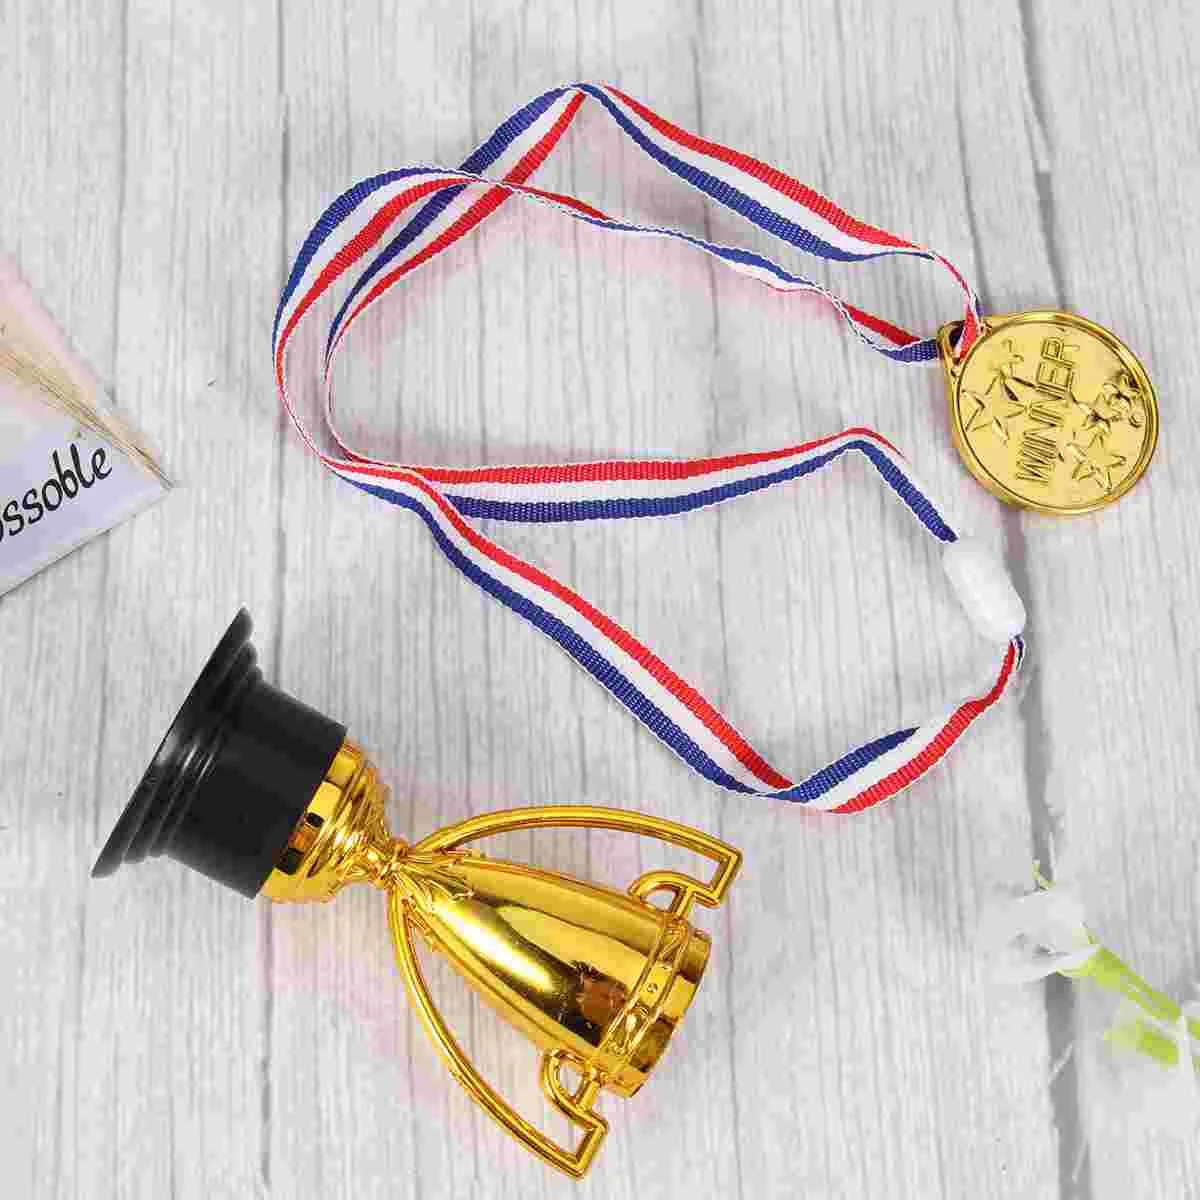 

Trophy Trophies Cupkids Medals Awards Award Mini Goldtrophys Soccertoy Winner Prize Small Adults World Medalfunny Party